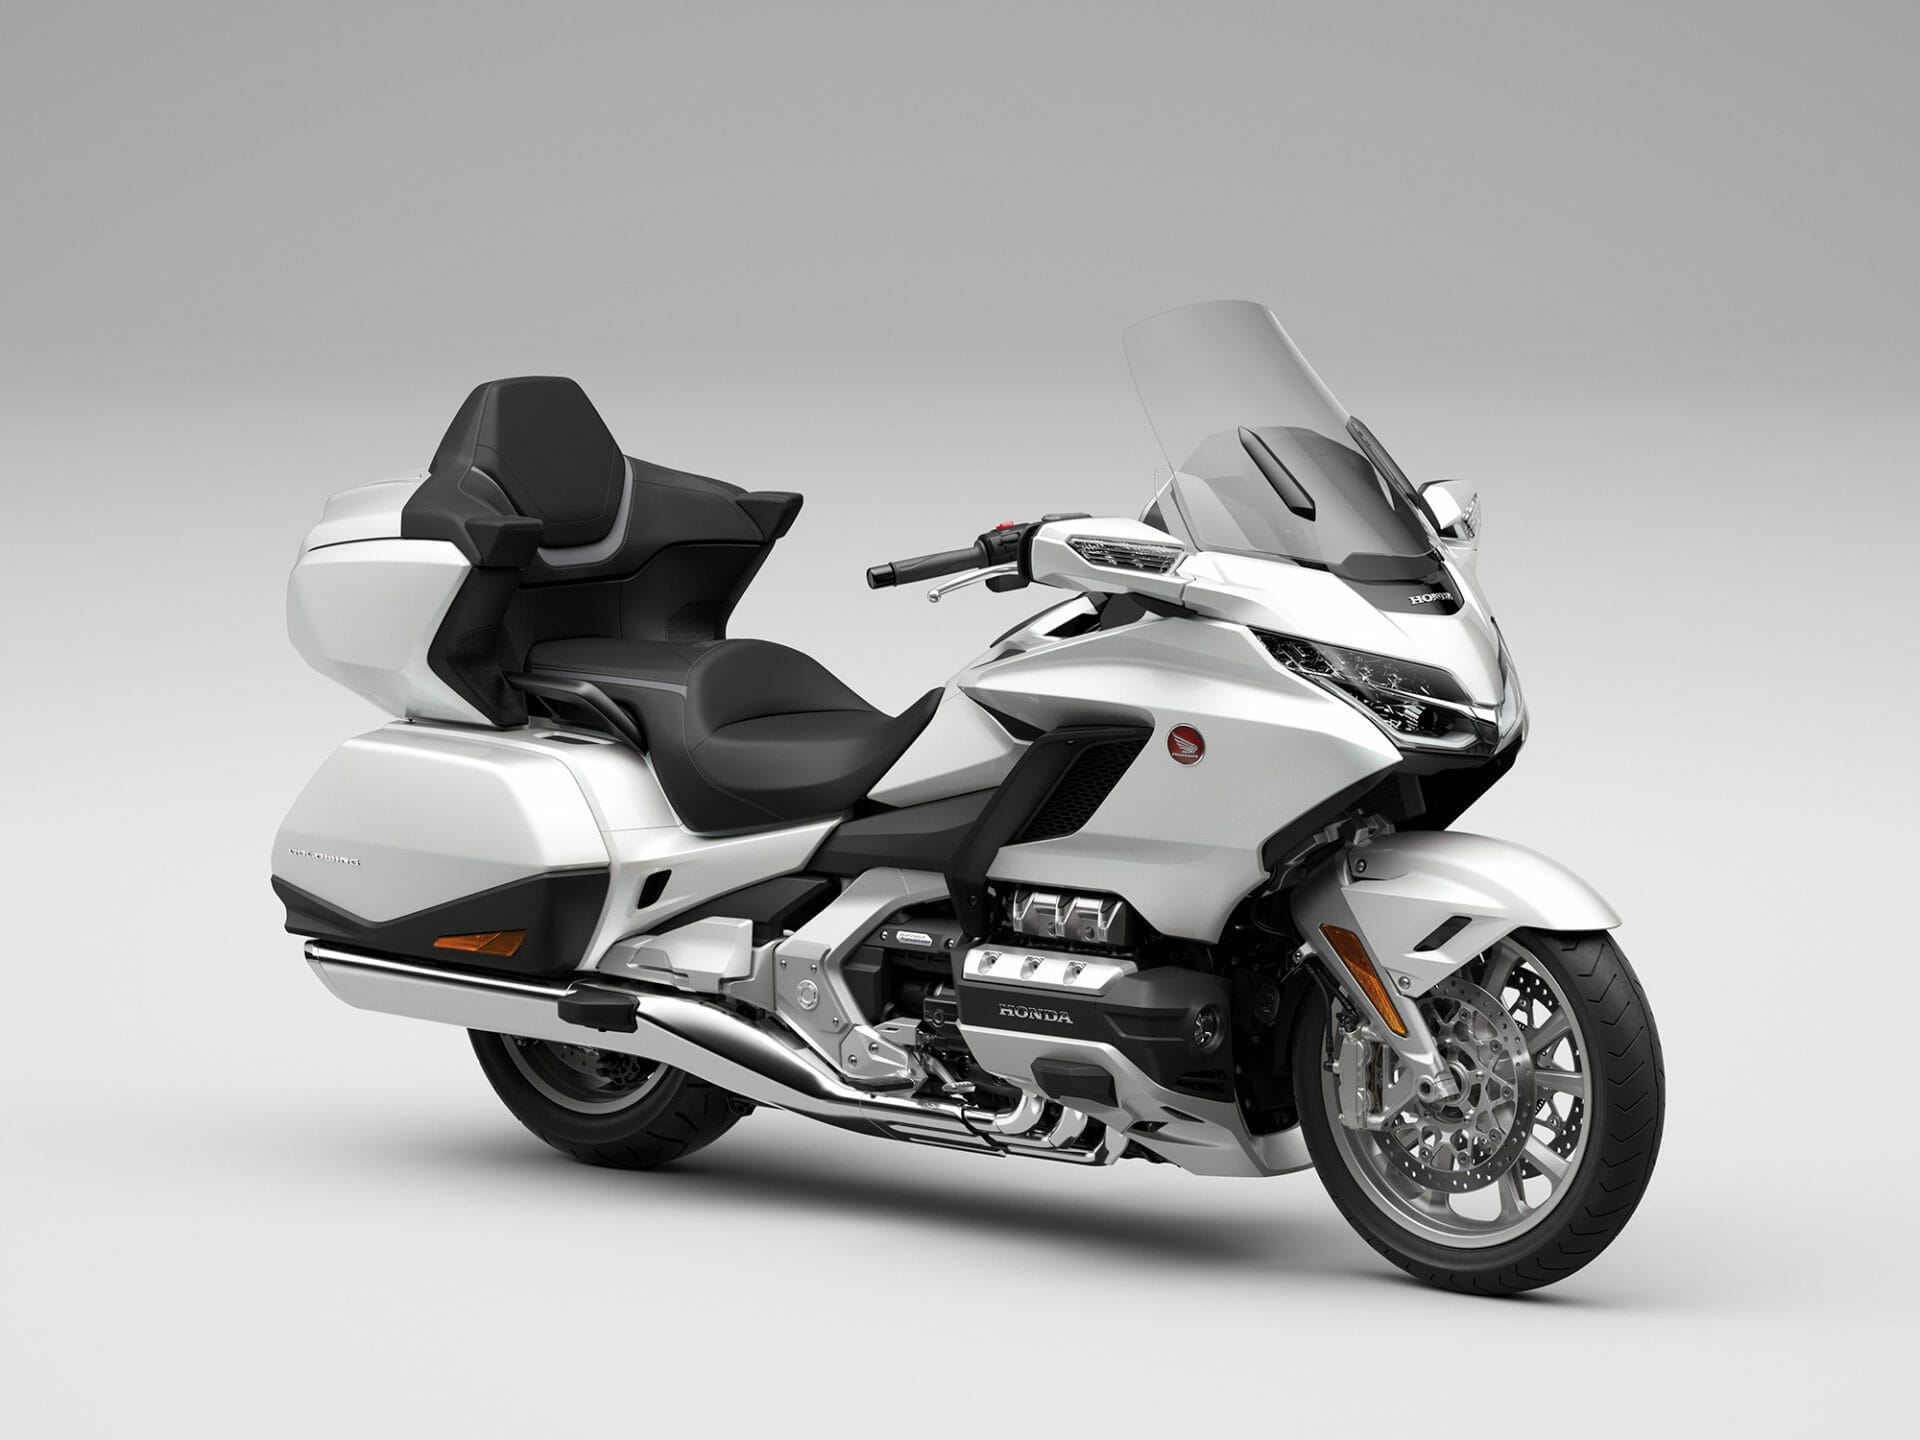 Honda Gold Wing 2022
- also in the MOTORCYCLES.NEWS APP